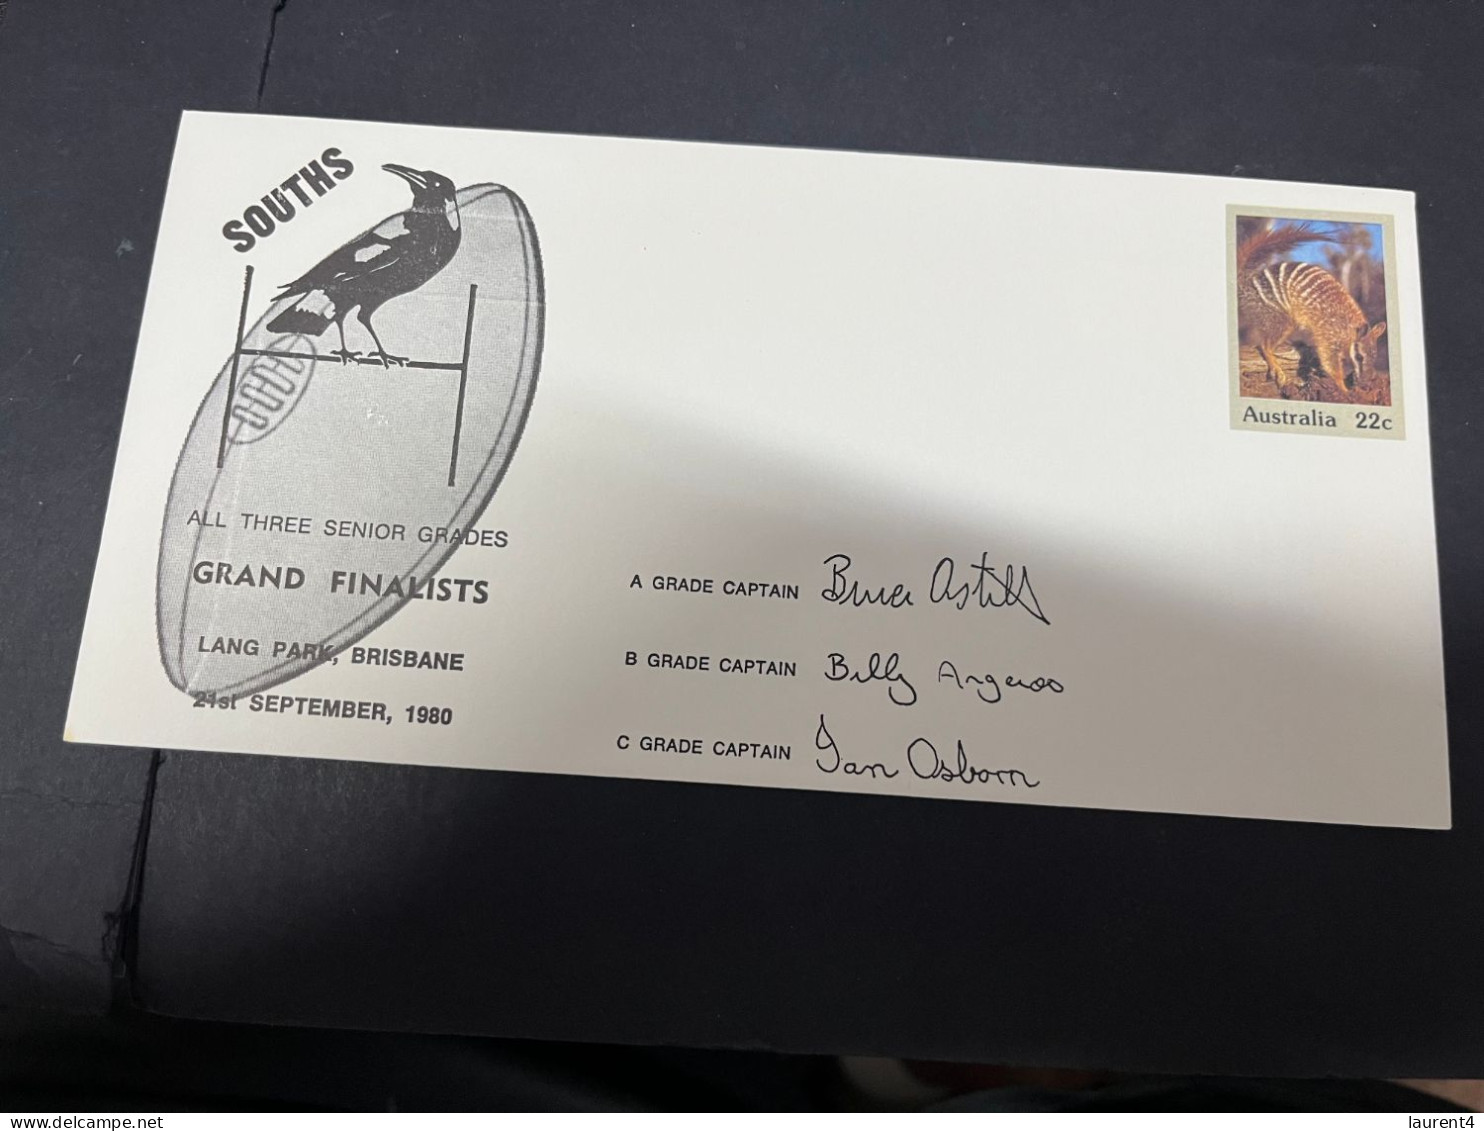 30-4-2023 (3 Z 29) Australia FDC (1 Covers) 1980 - OZ Football - South (magpies) Grand Finalists (signed - Numbat) - FDC